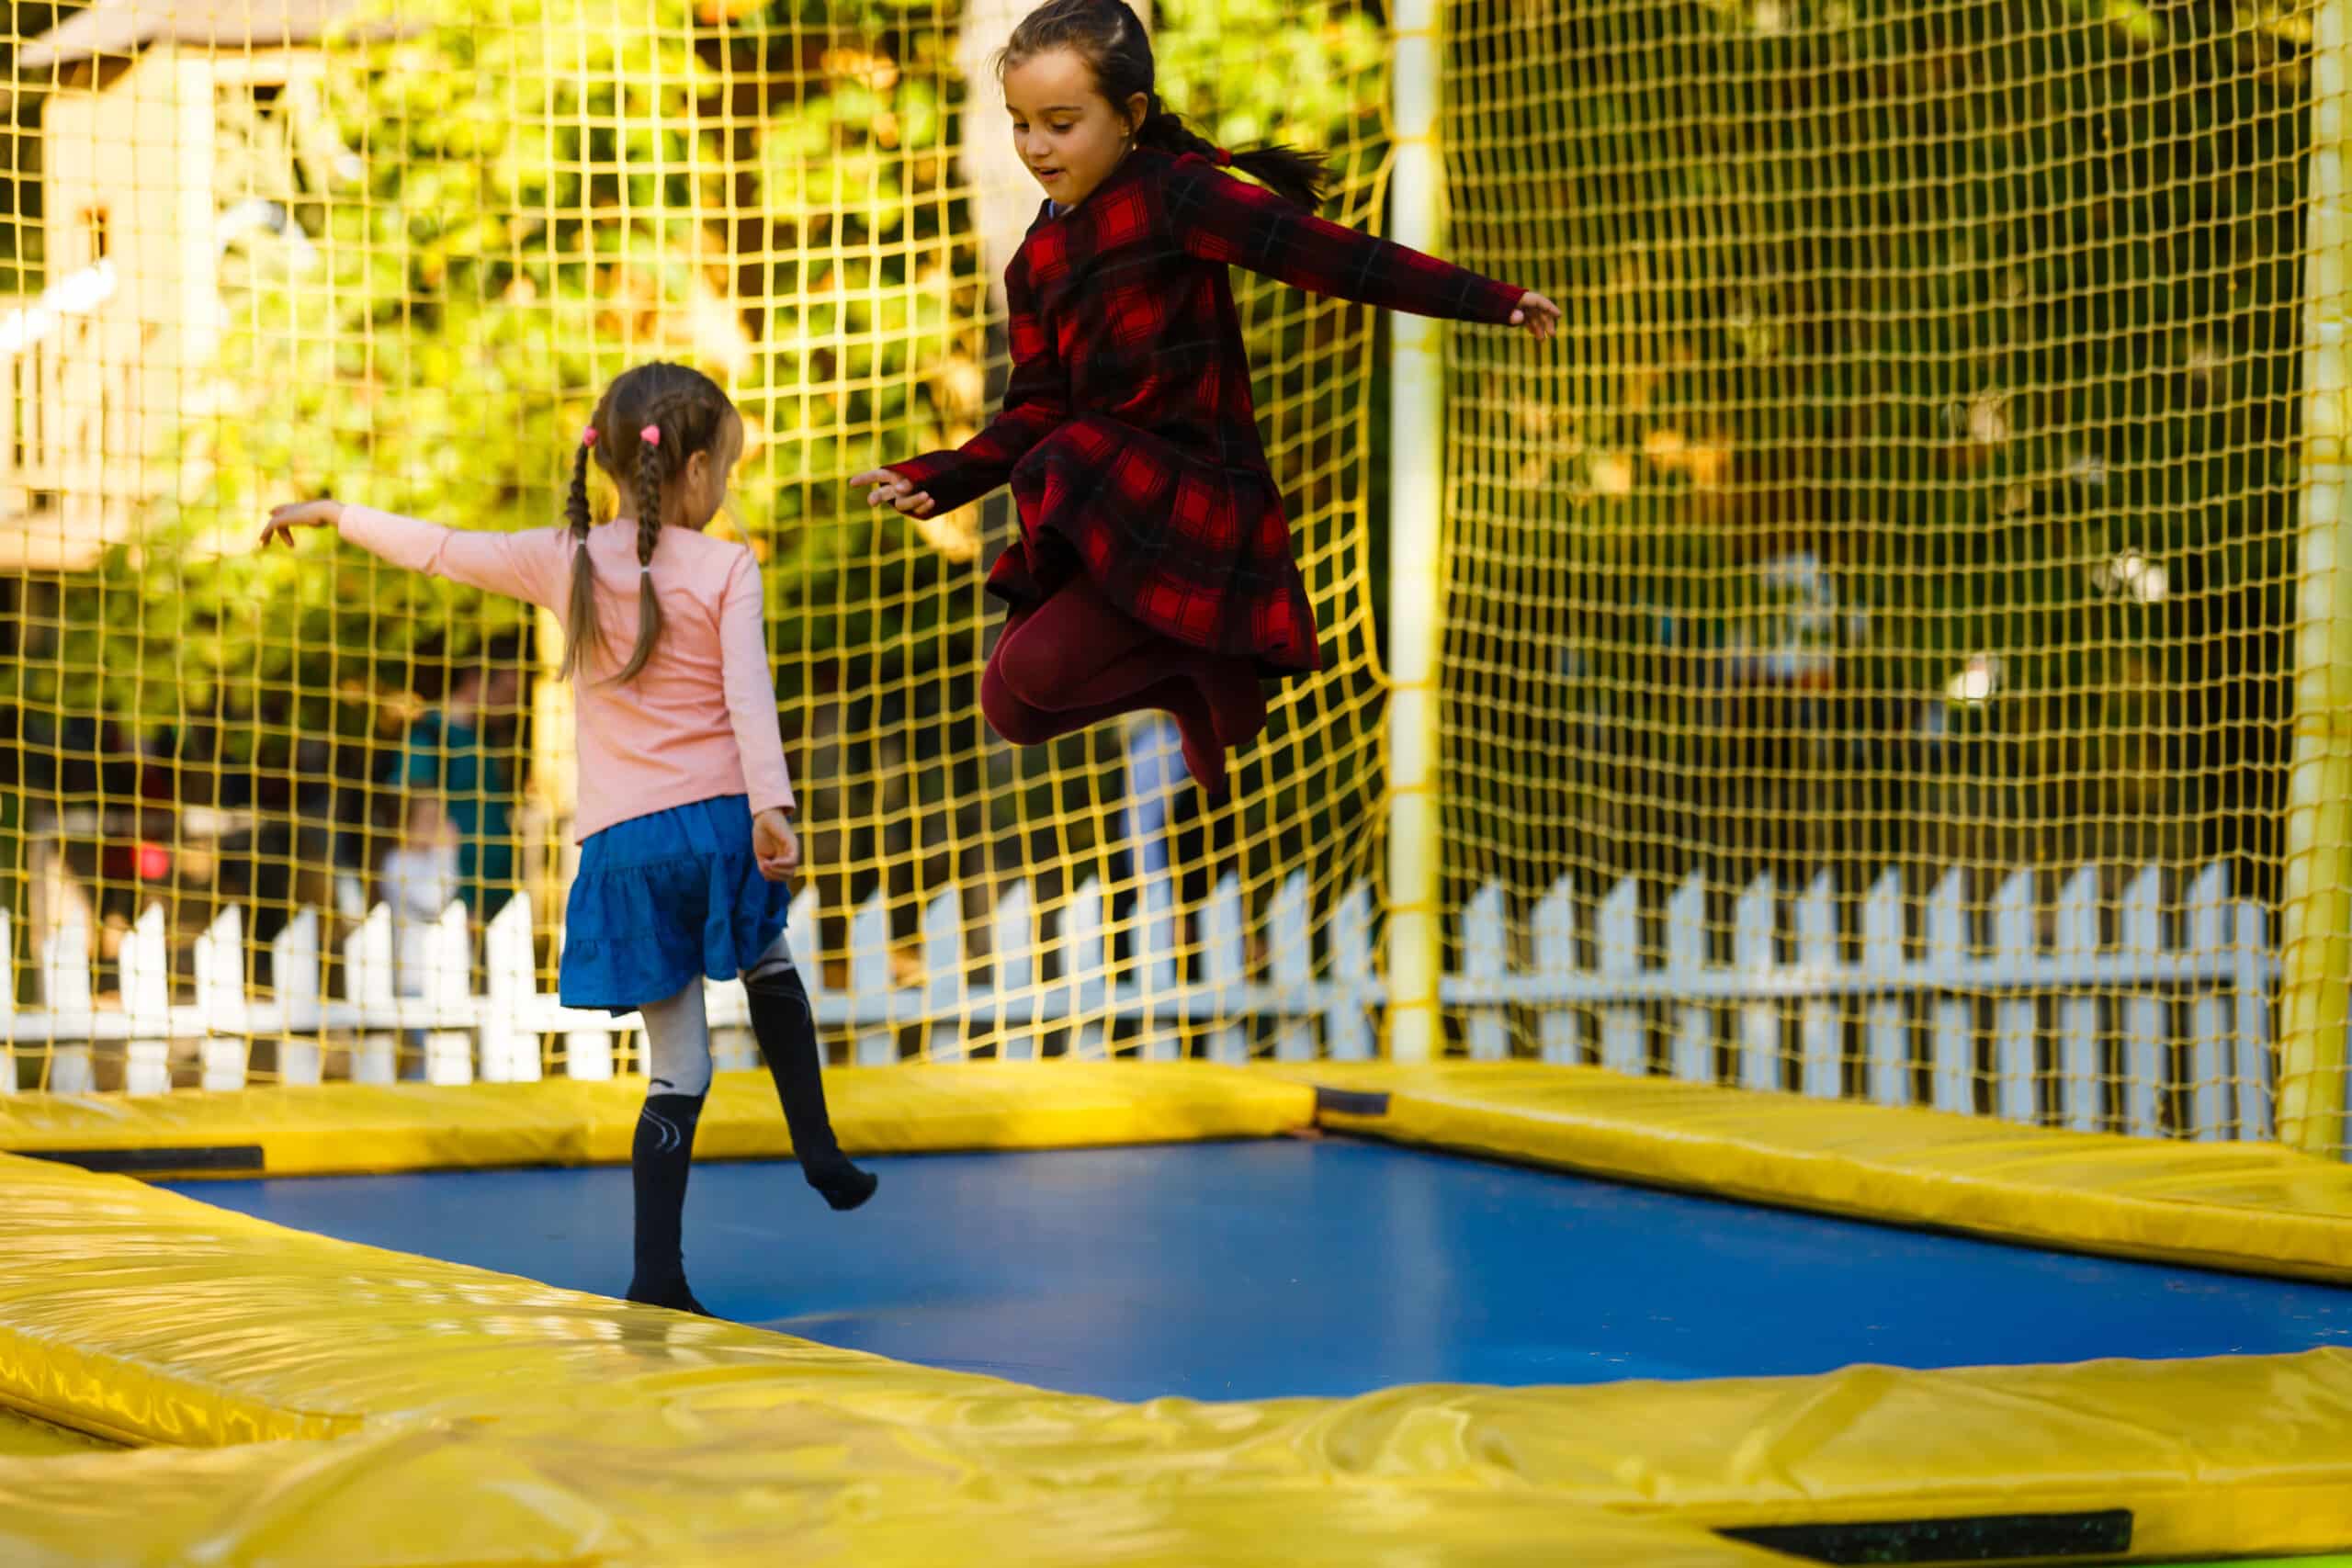 www.appr.com : Does trampoline add to homeowners insurance?